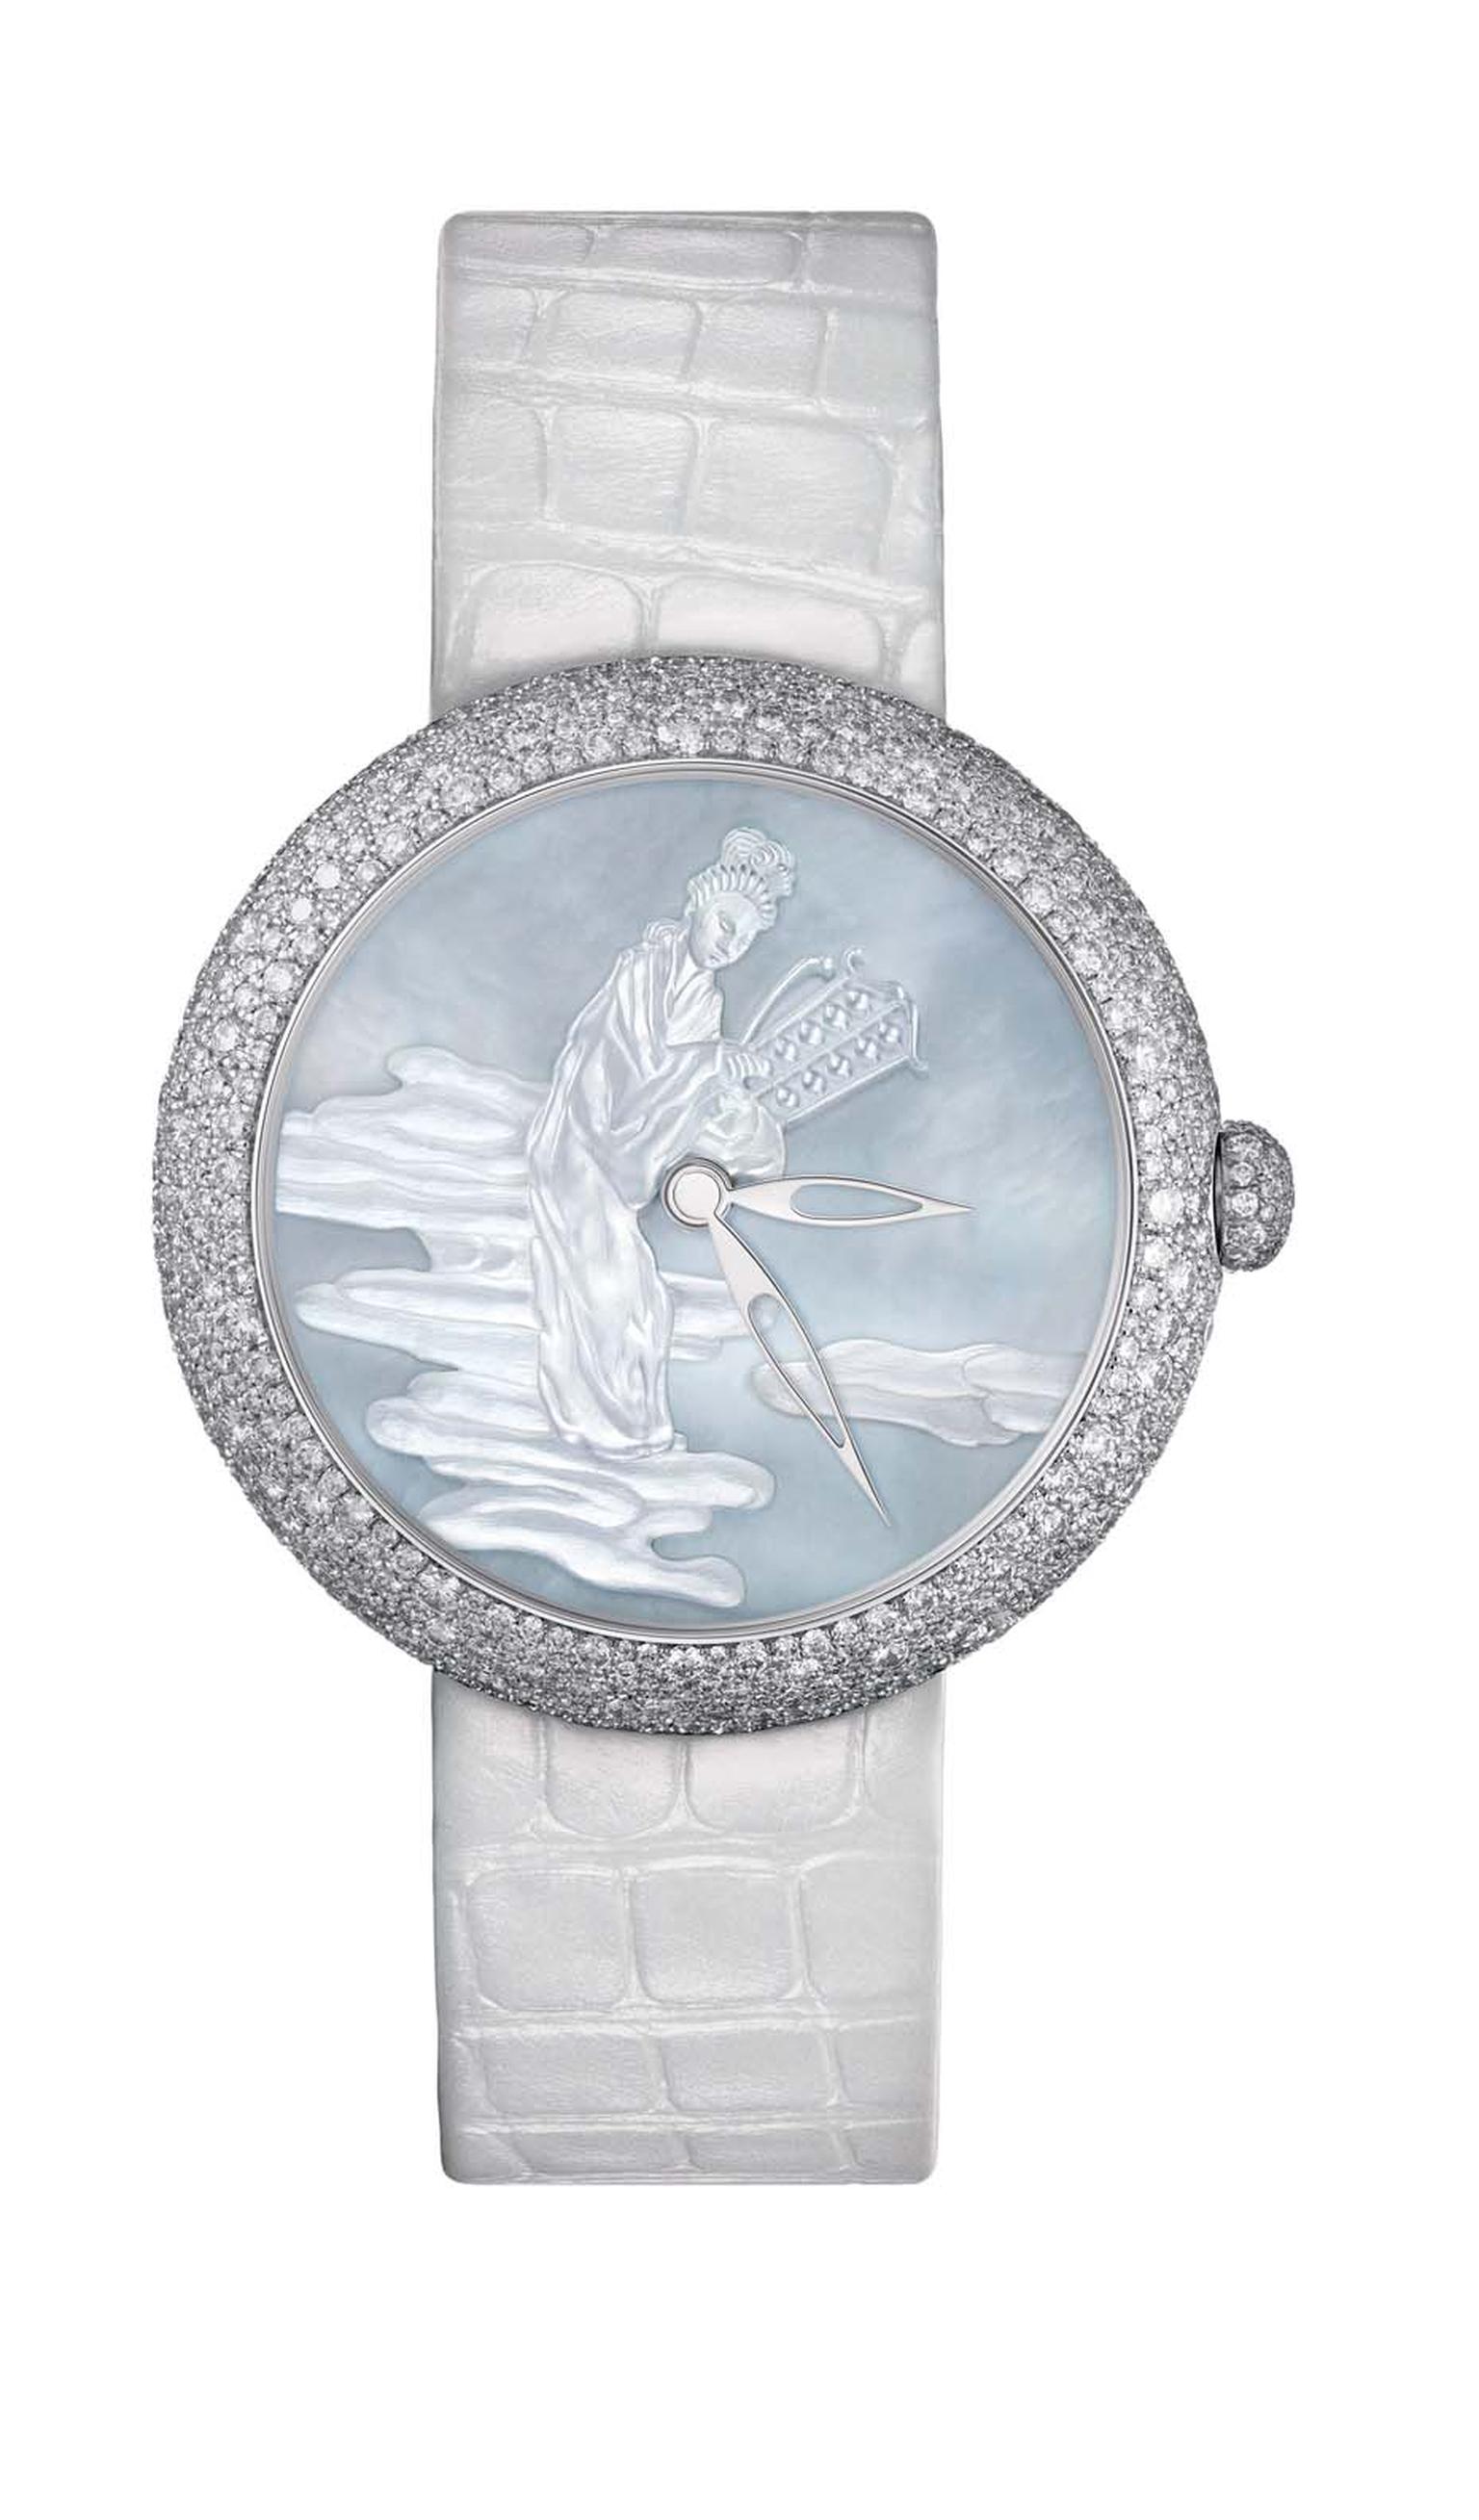 moiselle Privé Coromandel watch in white gold, one of two watches that form the Coromandel Dial Set, with a sculpted mother-of-pearl dial, snow-set with diamonds